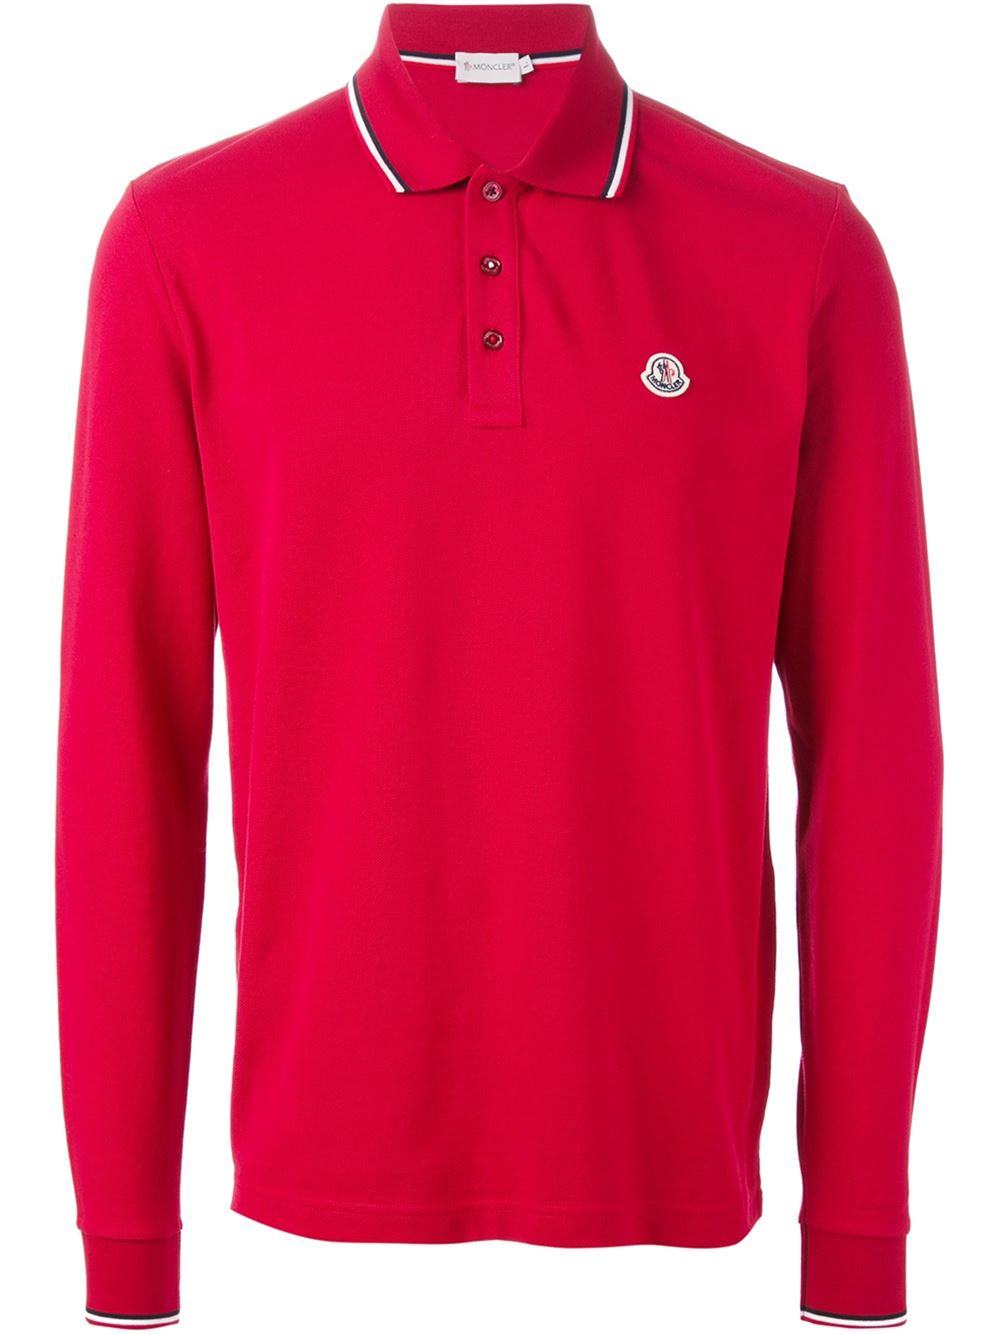 Lyst - Moncler Long Sleeve Polo Shirt in Red for Men